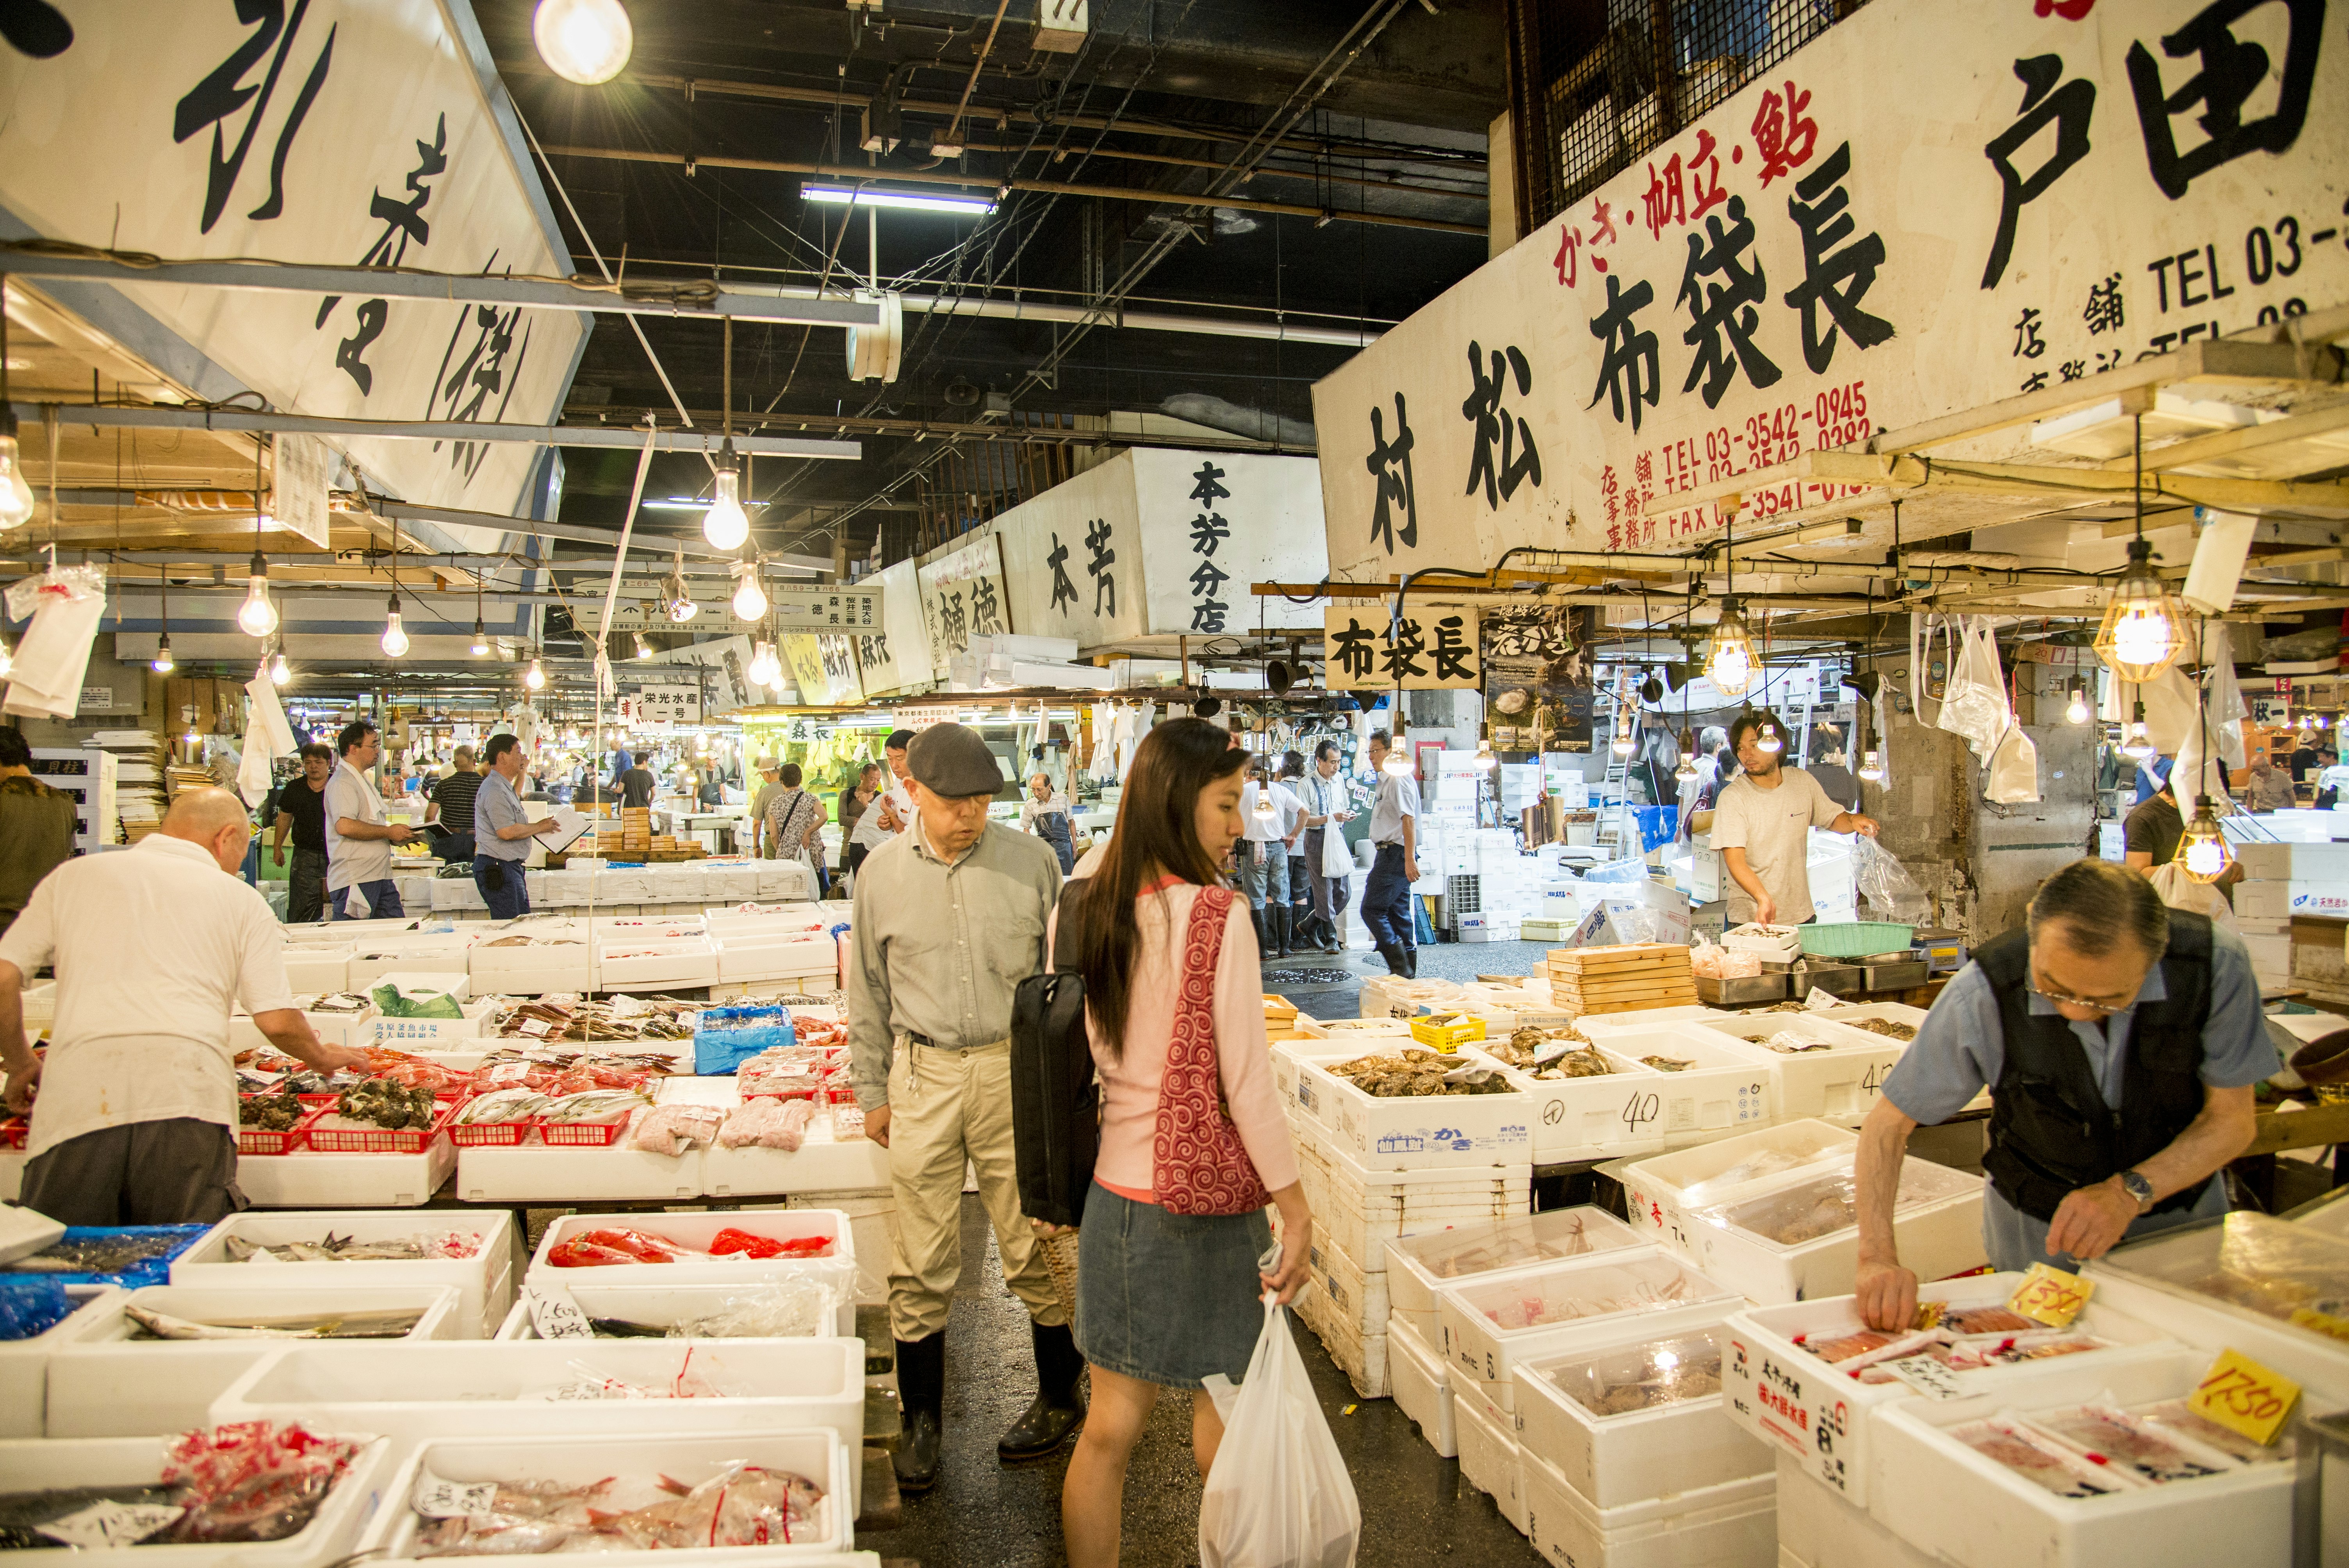 Shoppers wandering the narrow passages between containers of freshly caught fish at Tsukiji Market in Tokyo.